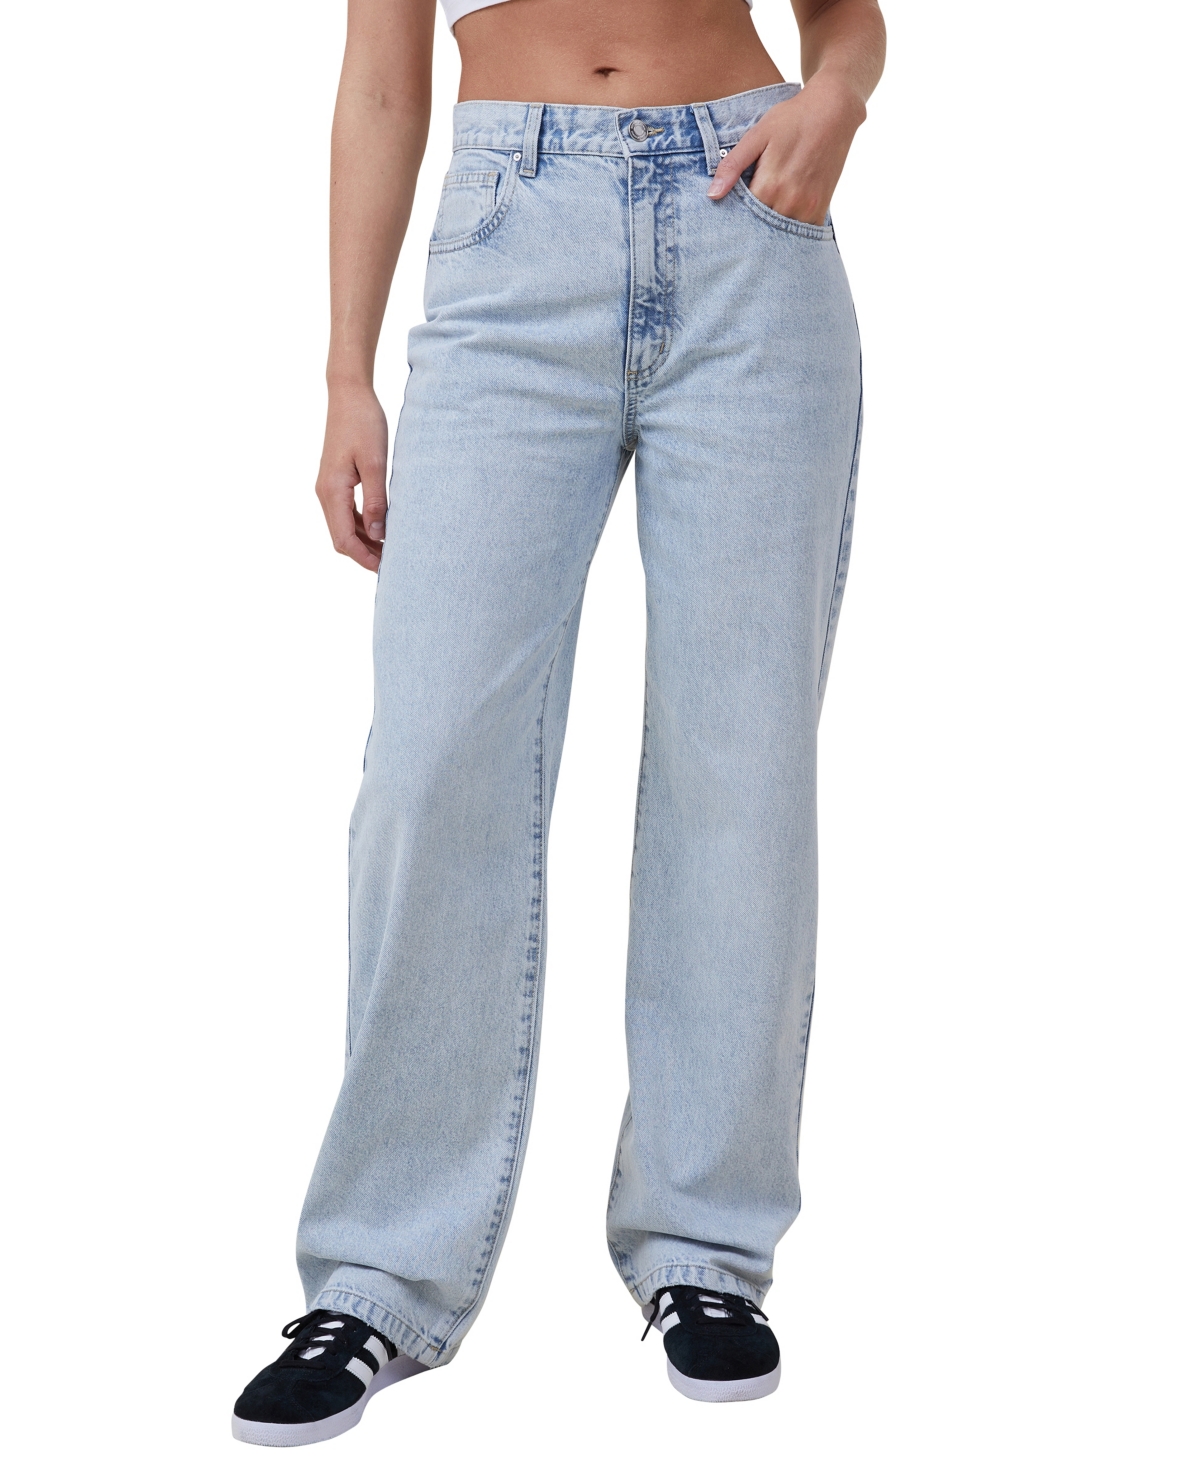 COTTON ON WOMEN'S LOOSE STRAIGHT JEANS